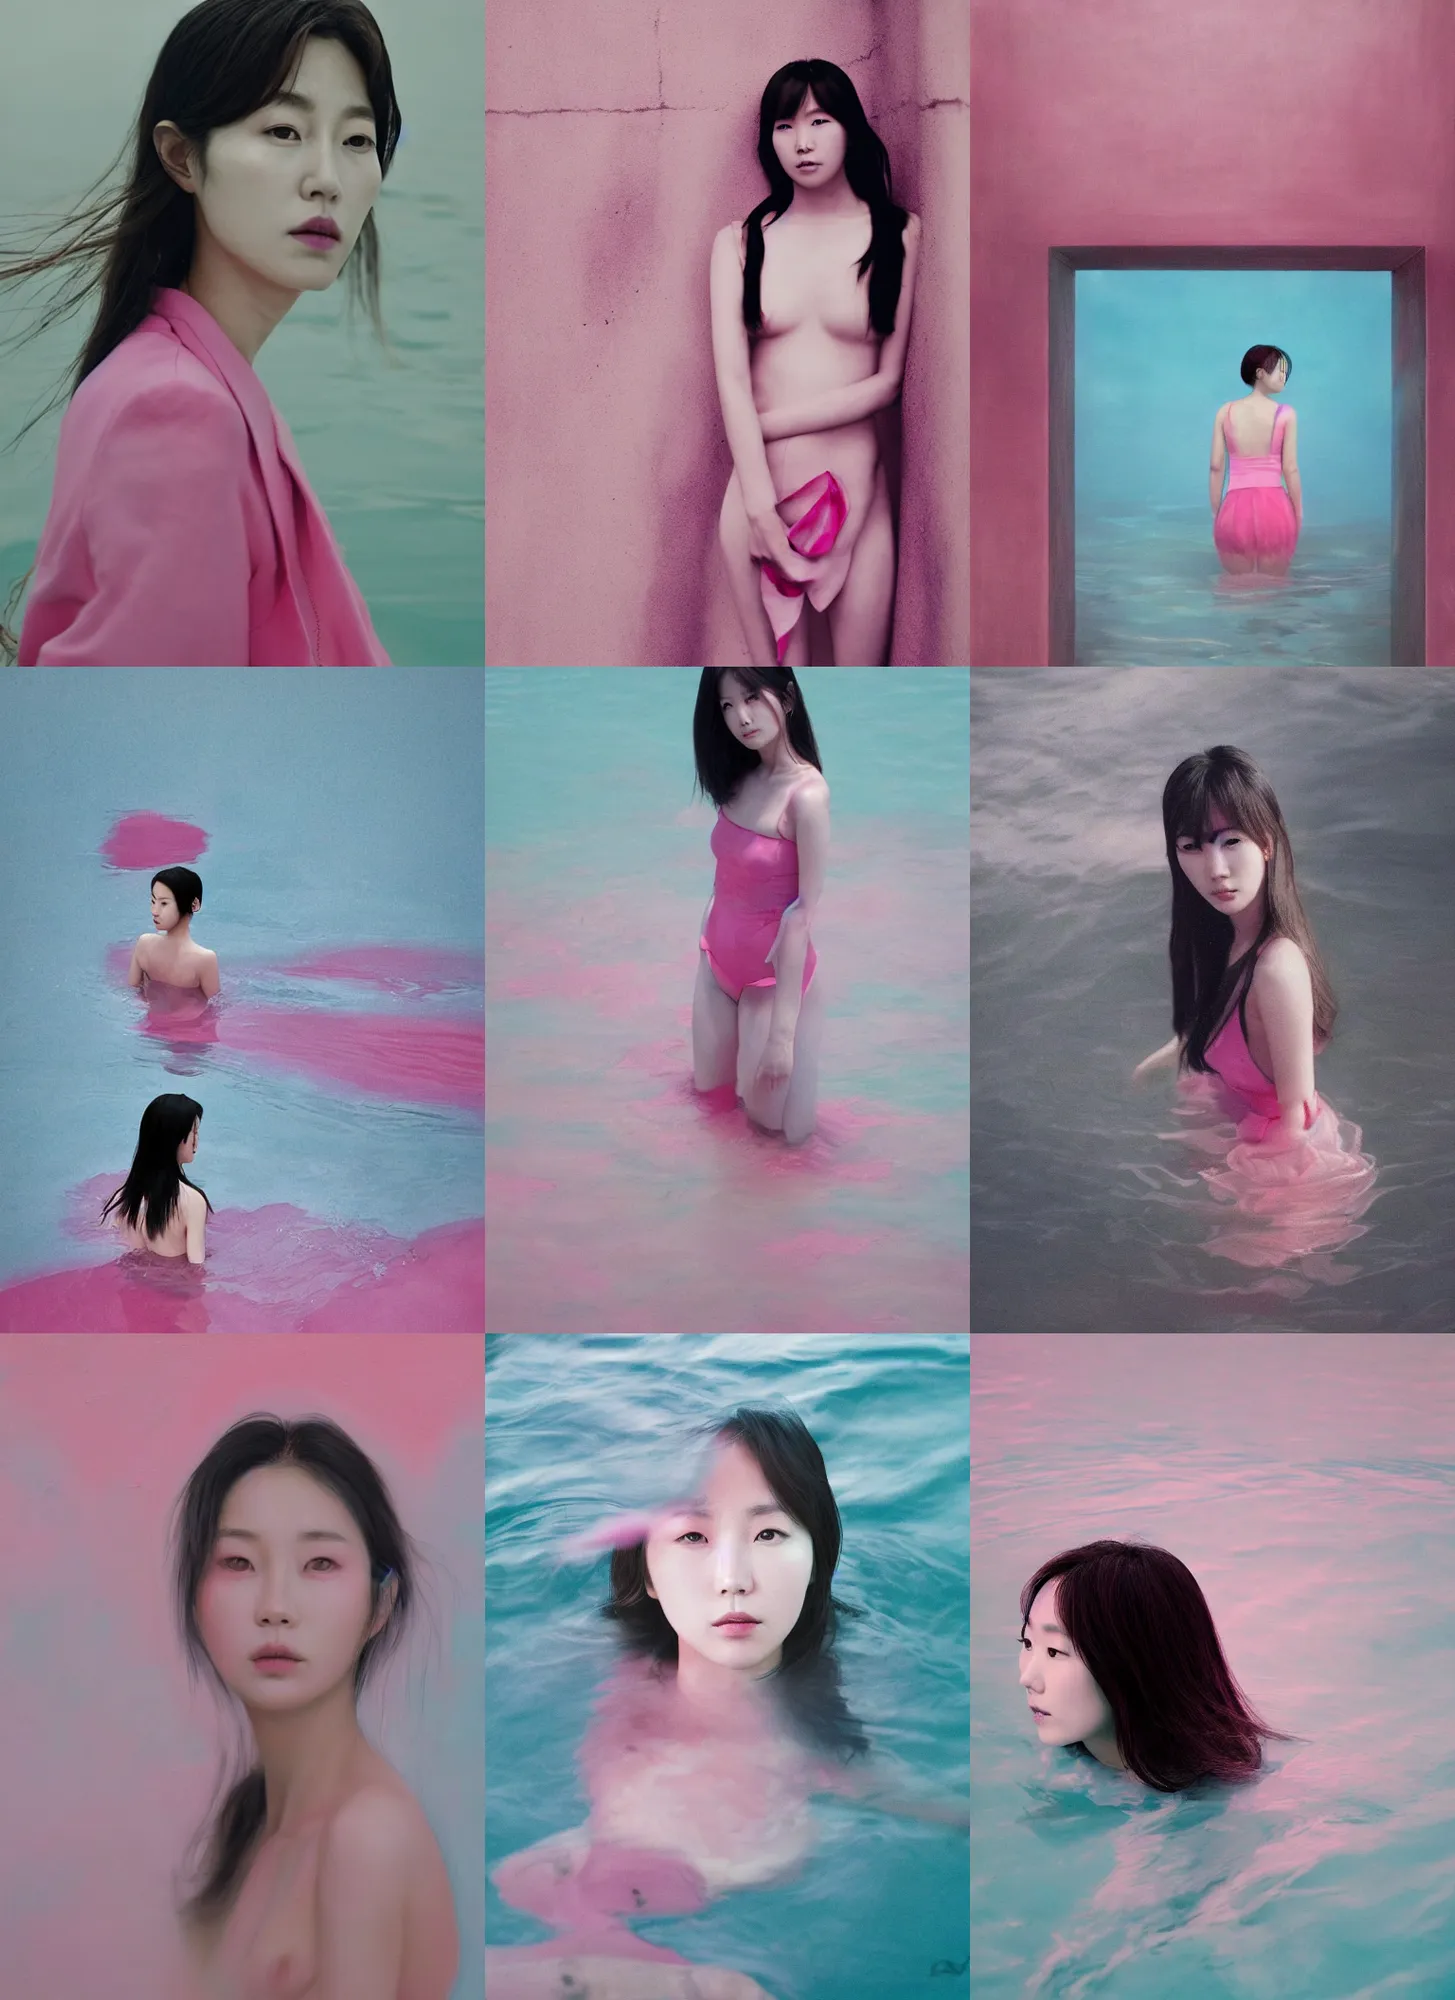 Prompt: lee jin - eun emerging from pink water by emily carroll, rule of thirds, seductive look, beautiful, cinematic atmosphere